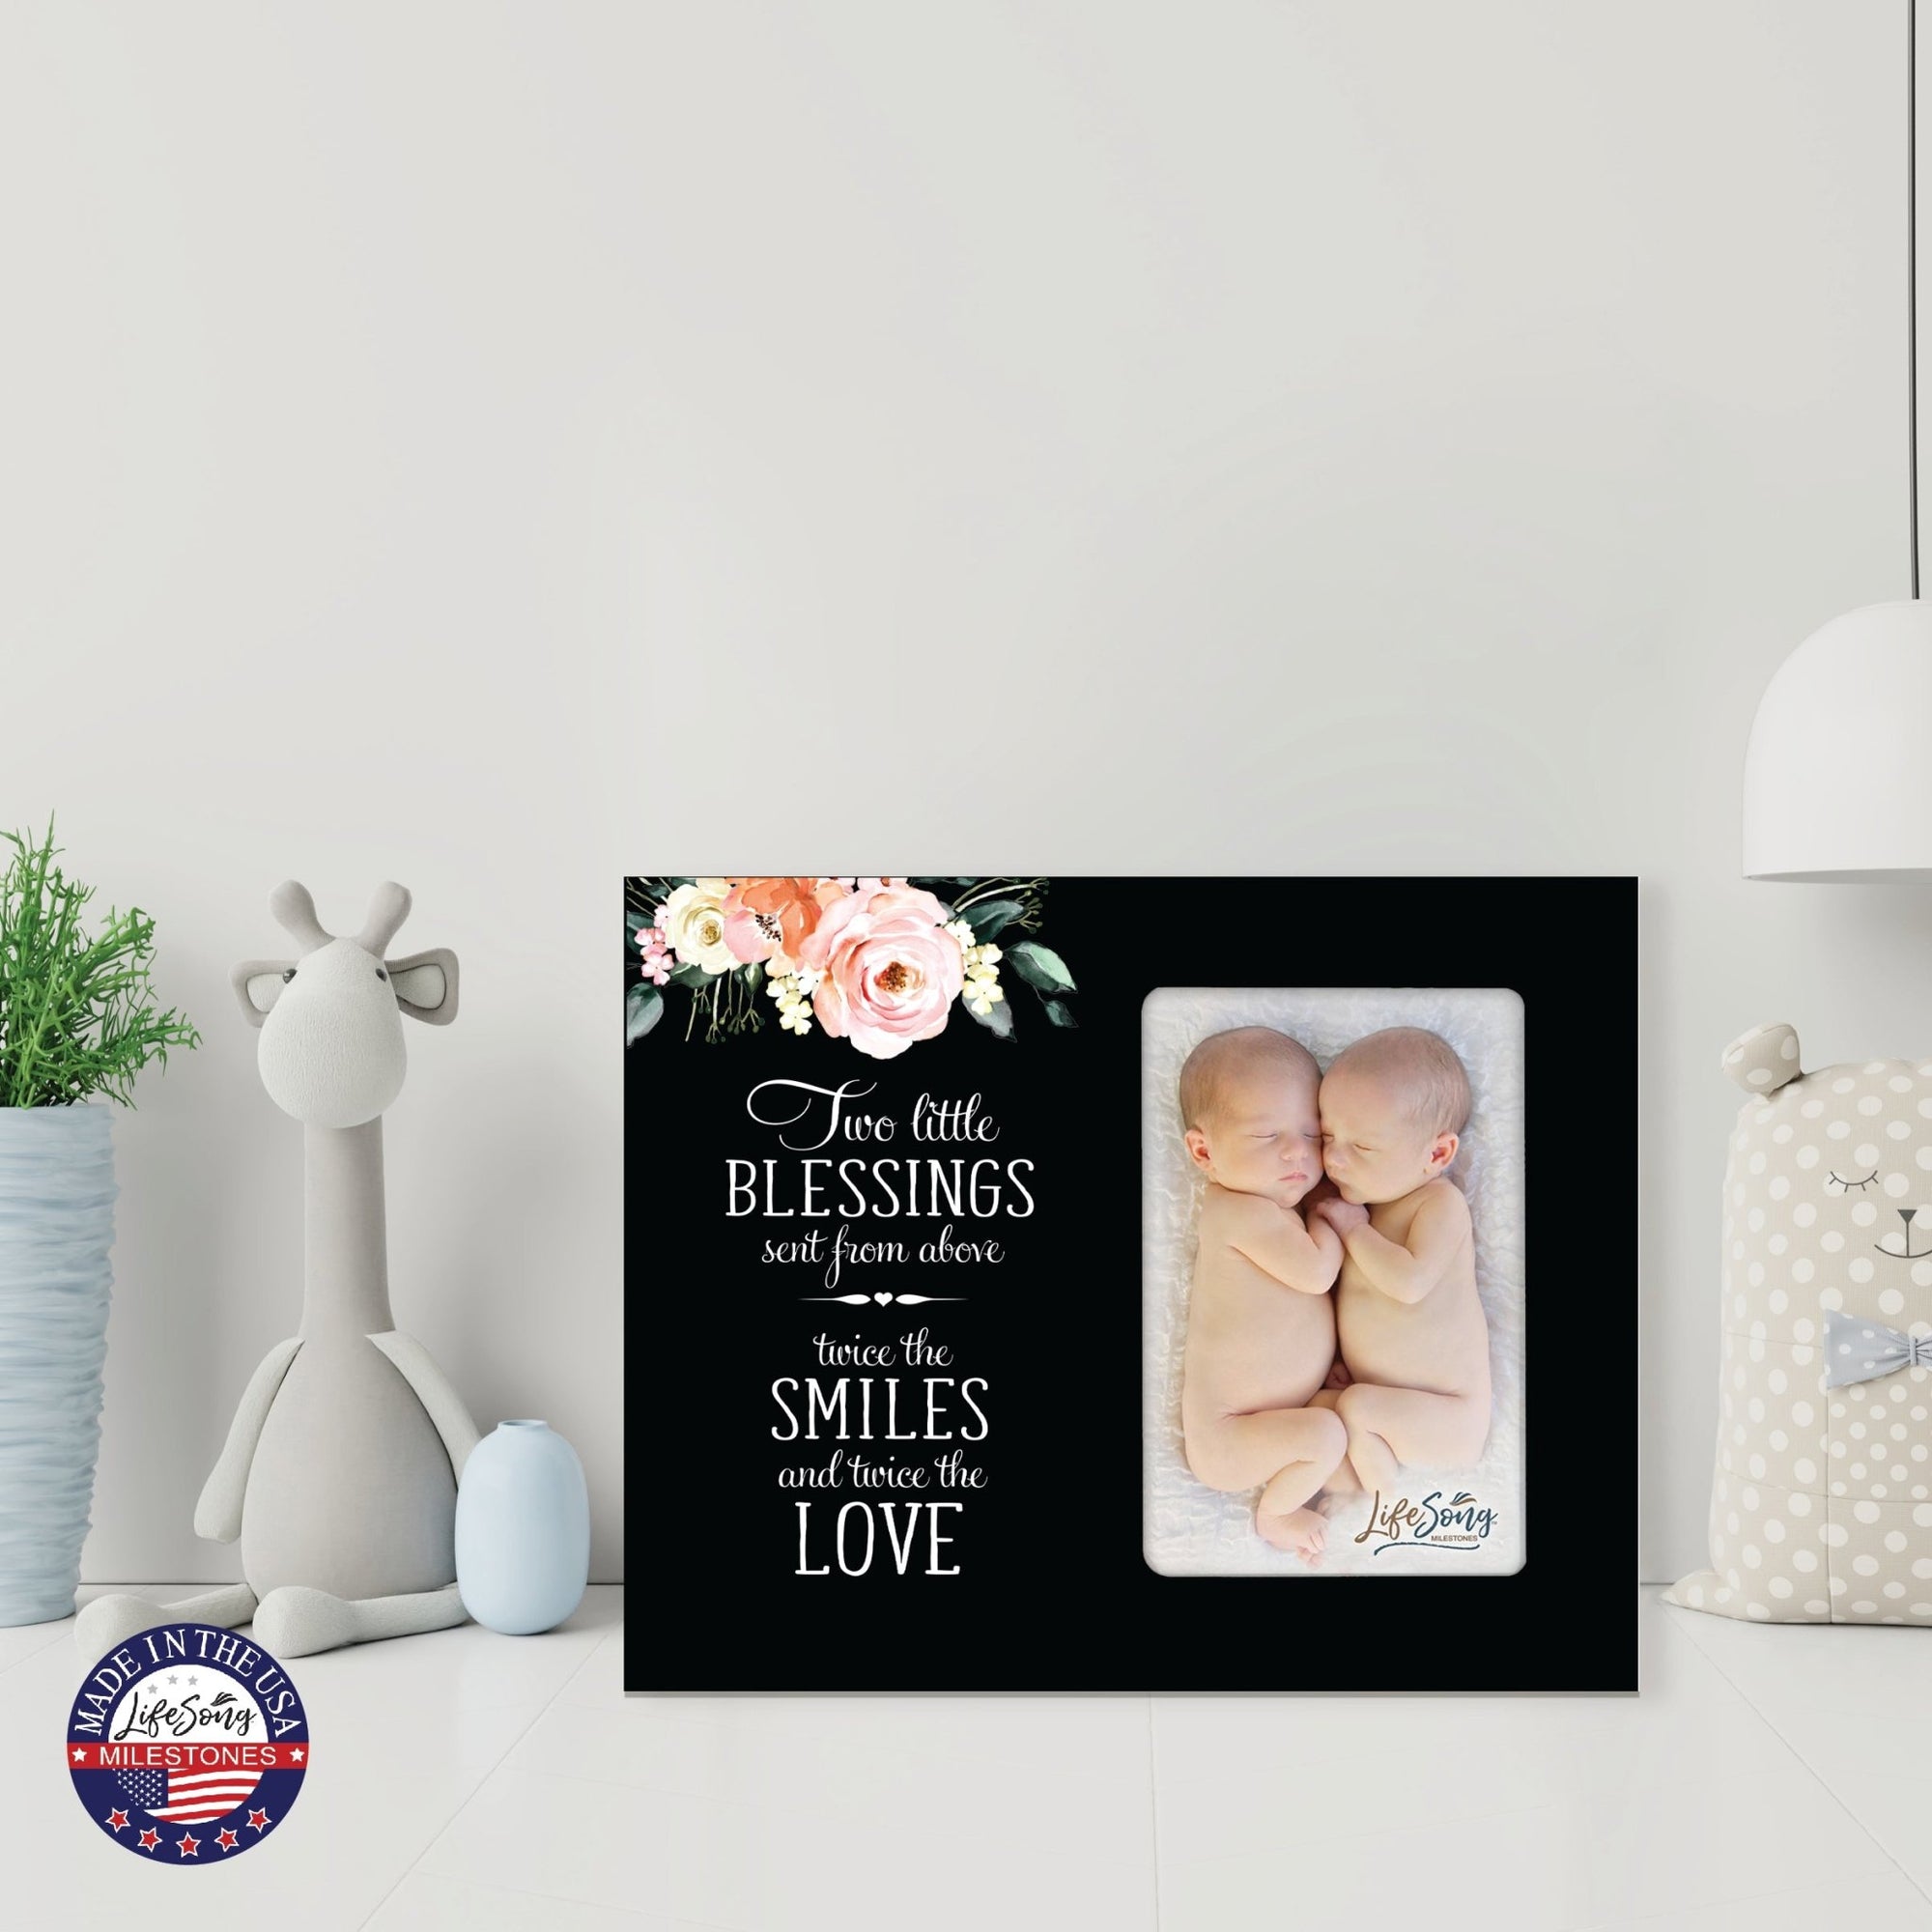 Floral Newborn Baby Twins Announcement Wooden Wall And Tabletop Photo Frame For New Parents Gift Ideas - LifeSong Milestones